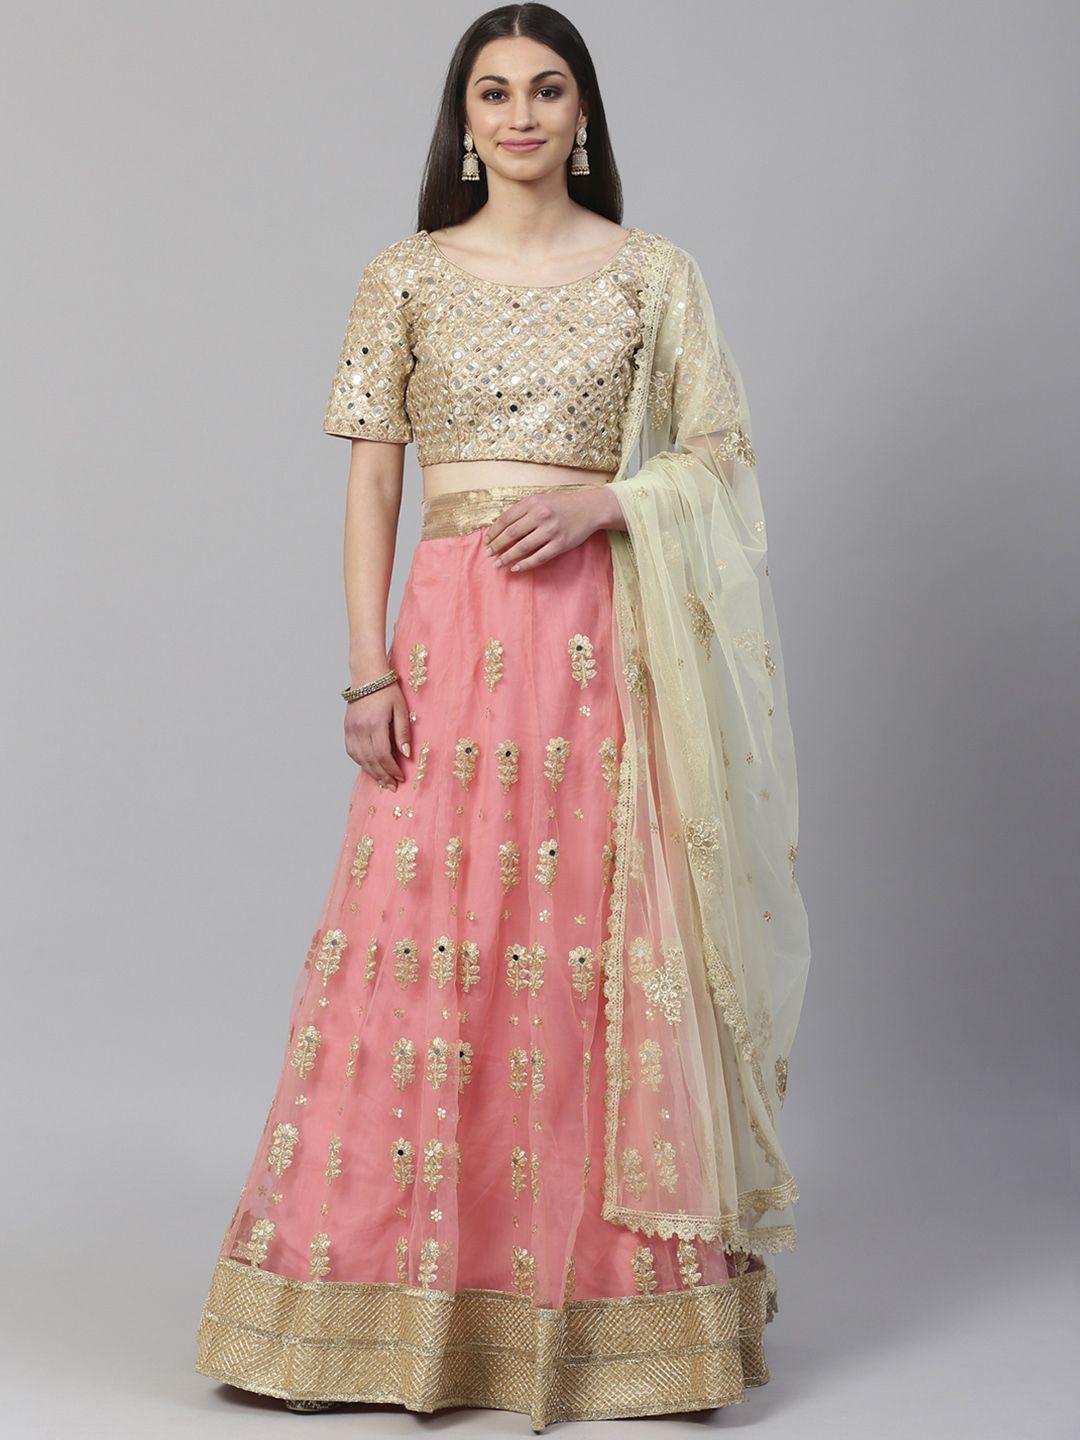 Readiprint Fashions Peach-Coloured & Beige Embroidered Semi-Stitched Lehenga & Unstitched Blouse with Dupatta